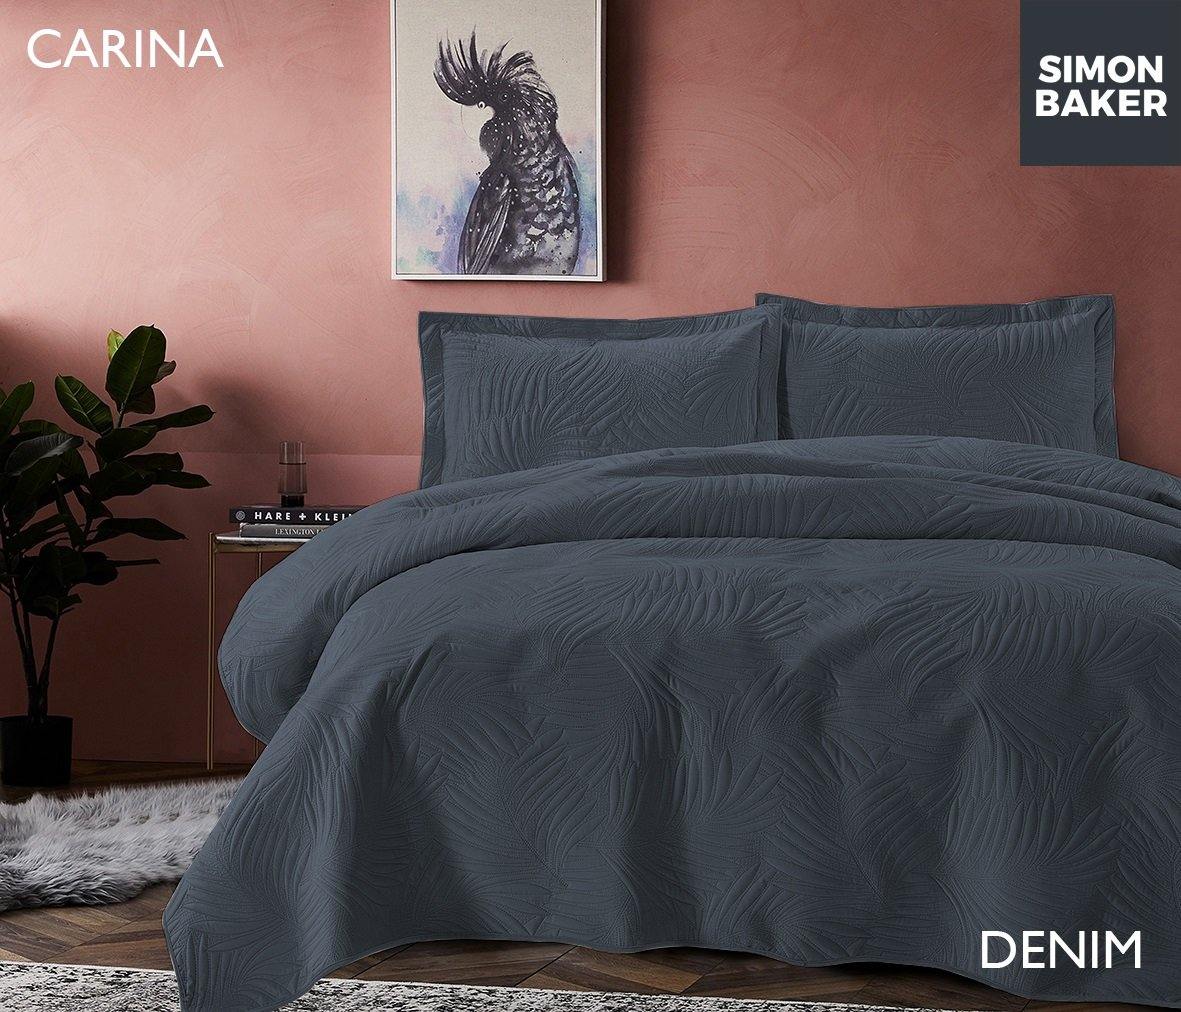 Simon Baker | Carina Quilted Bedspread Denim (Various Sizes)